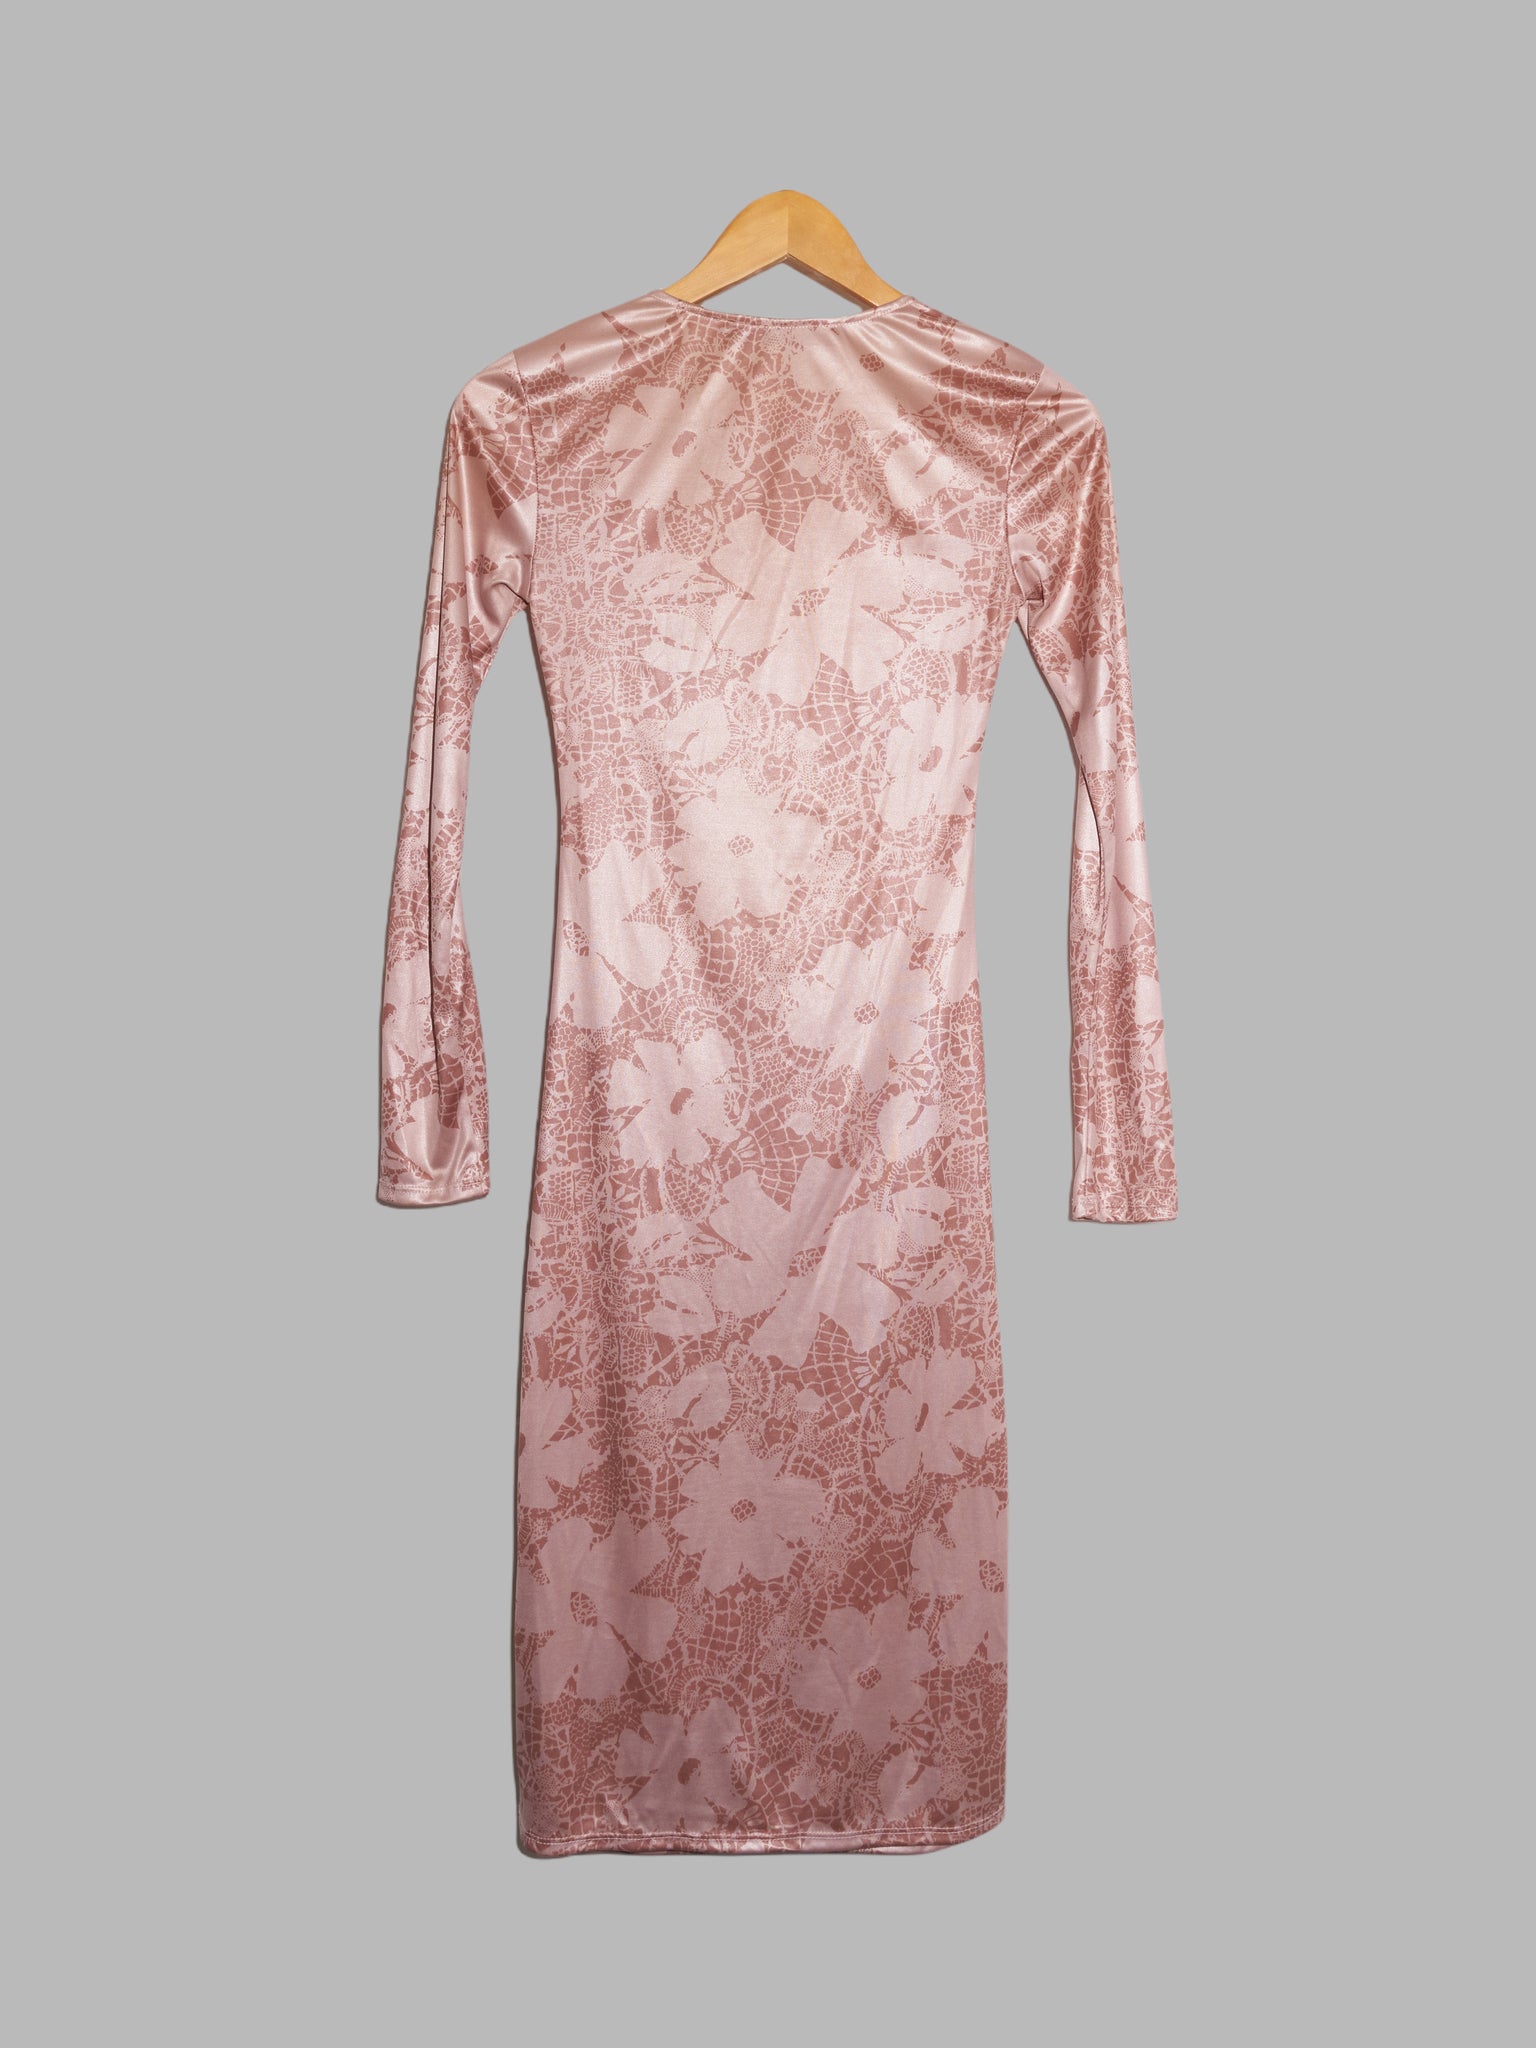 Jean Colonna pink floral print long sleeve dress with drawstring waist detail